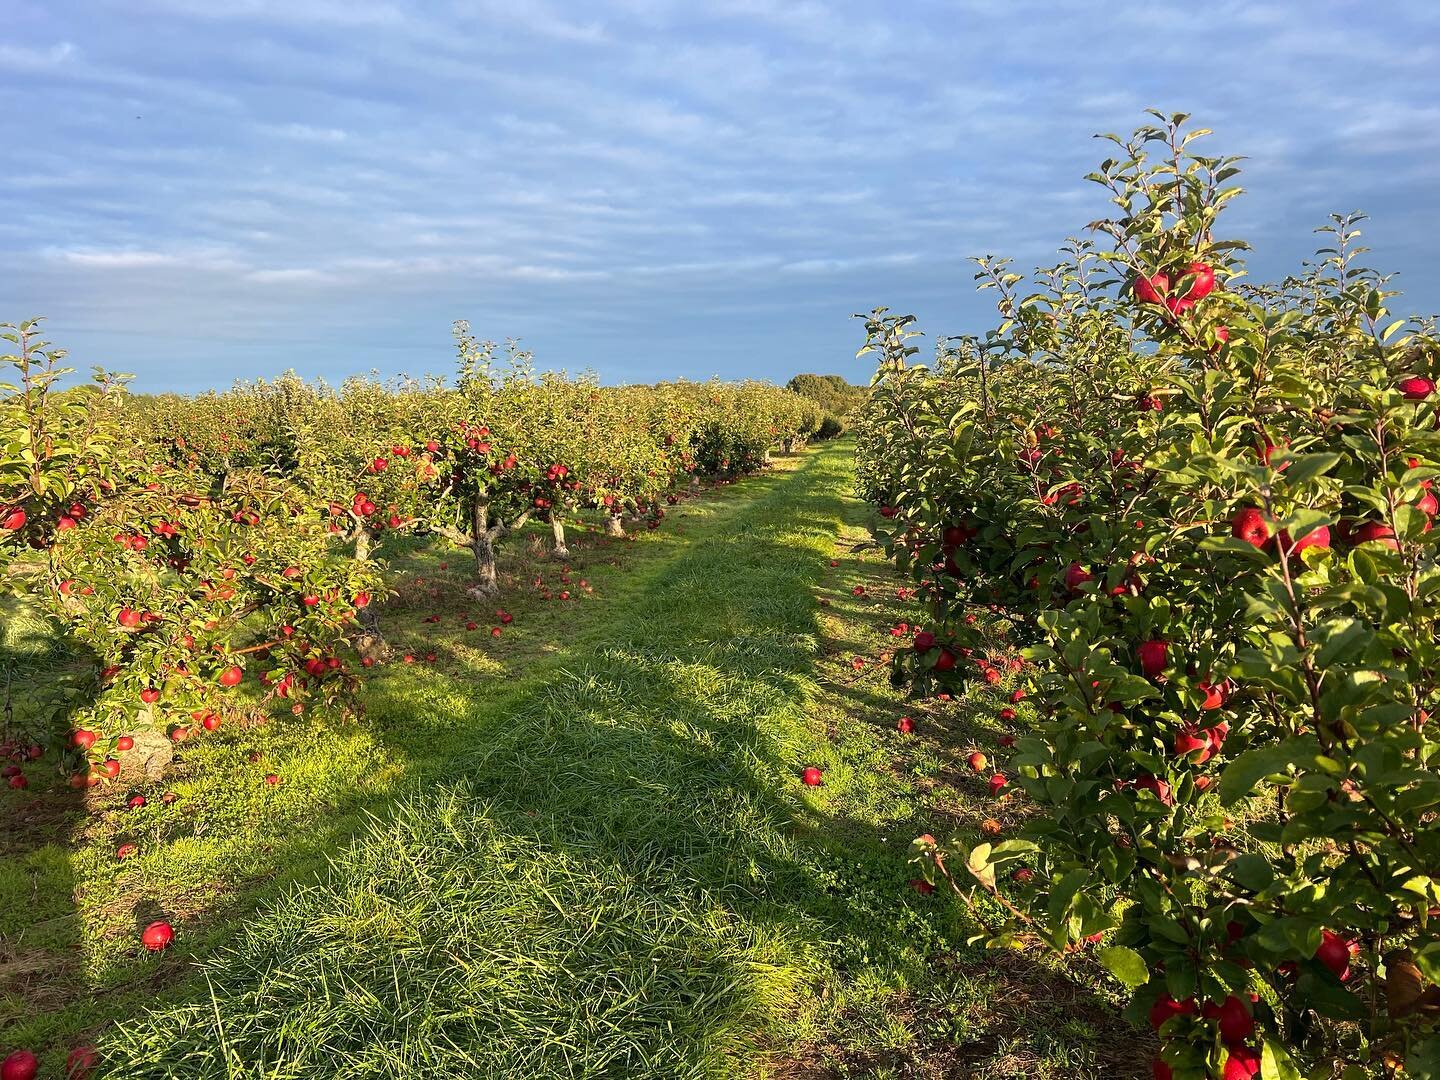 Wednesday: Big orchard open today! 9-4:30. Pumpkin picking today 11-4:30. Both fields completely loaded, barely touched this year due to all the rainy weekends. Excellent picking #appleorchard #applepicking #pumpkinpicking #pumpkinfield #lewinfarms #